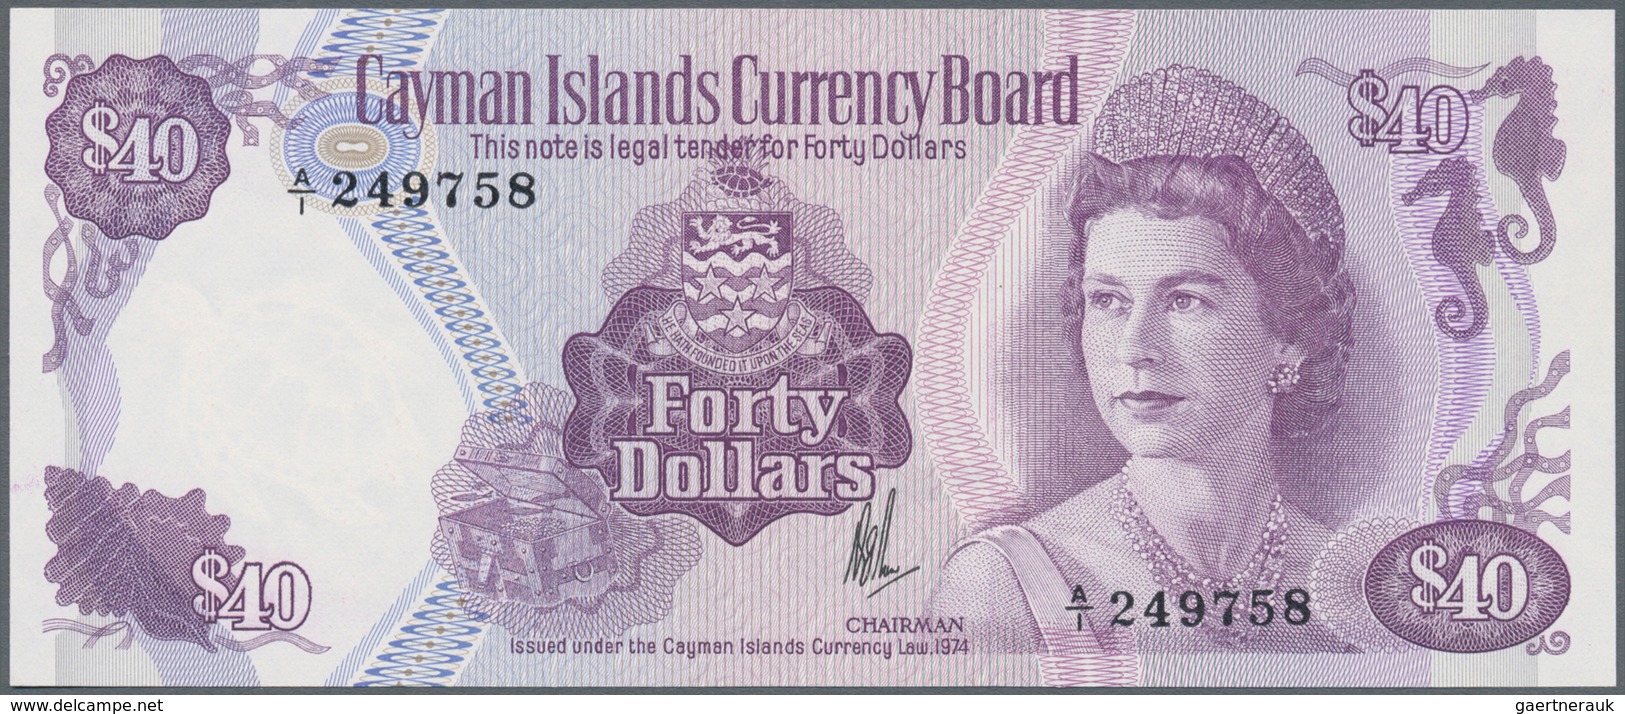 Cayman Islands: 40 Dollars L.1974 P. 9, Portrait QEII, S/N A/1 249758, With Picture Of "Pirates Week - Kaaimaneilanden